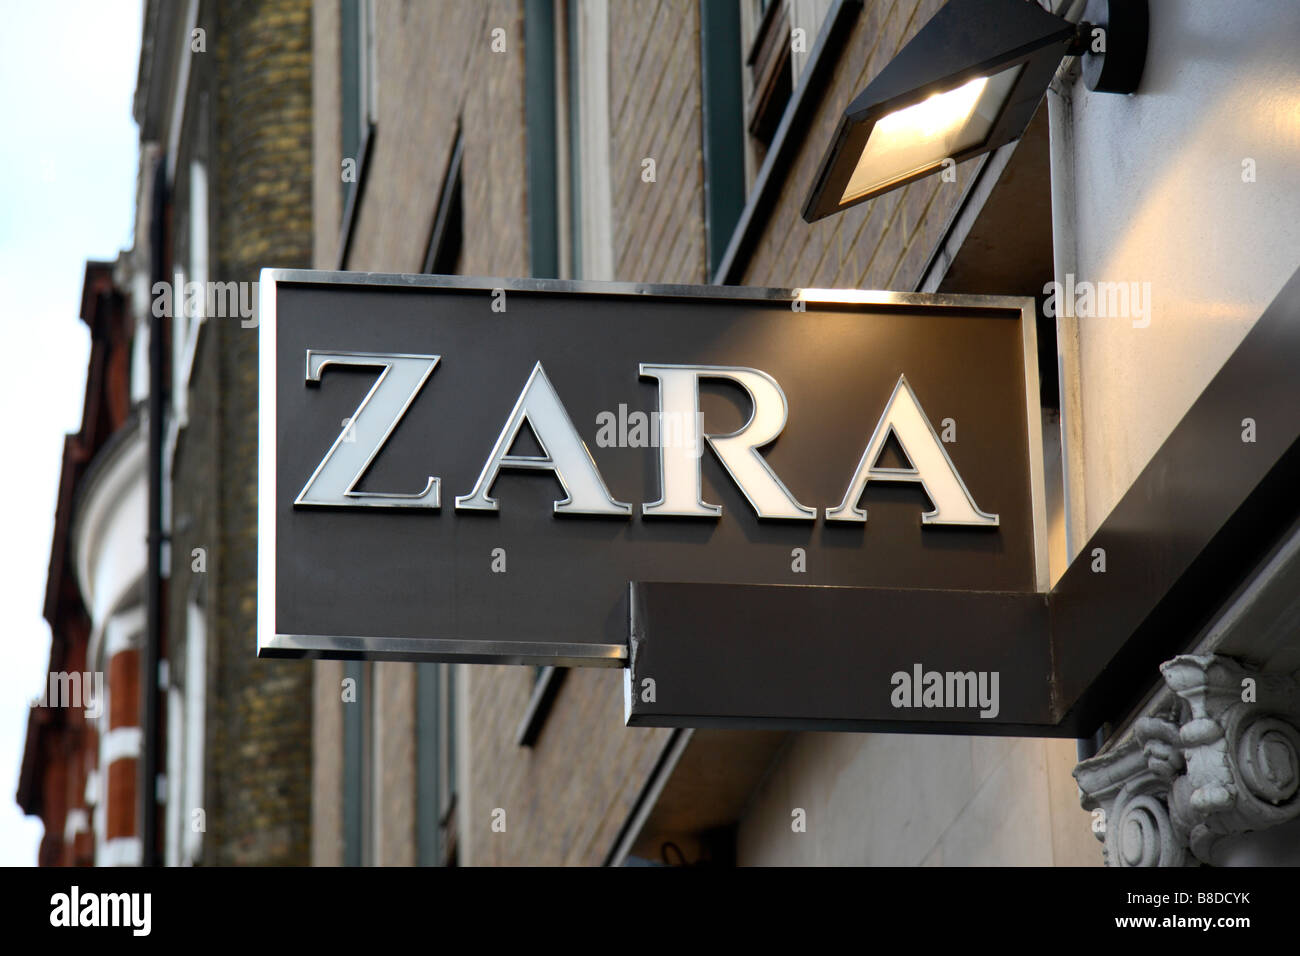 Zara Shop Front High Resolution Stock Photography and Images - Alamy